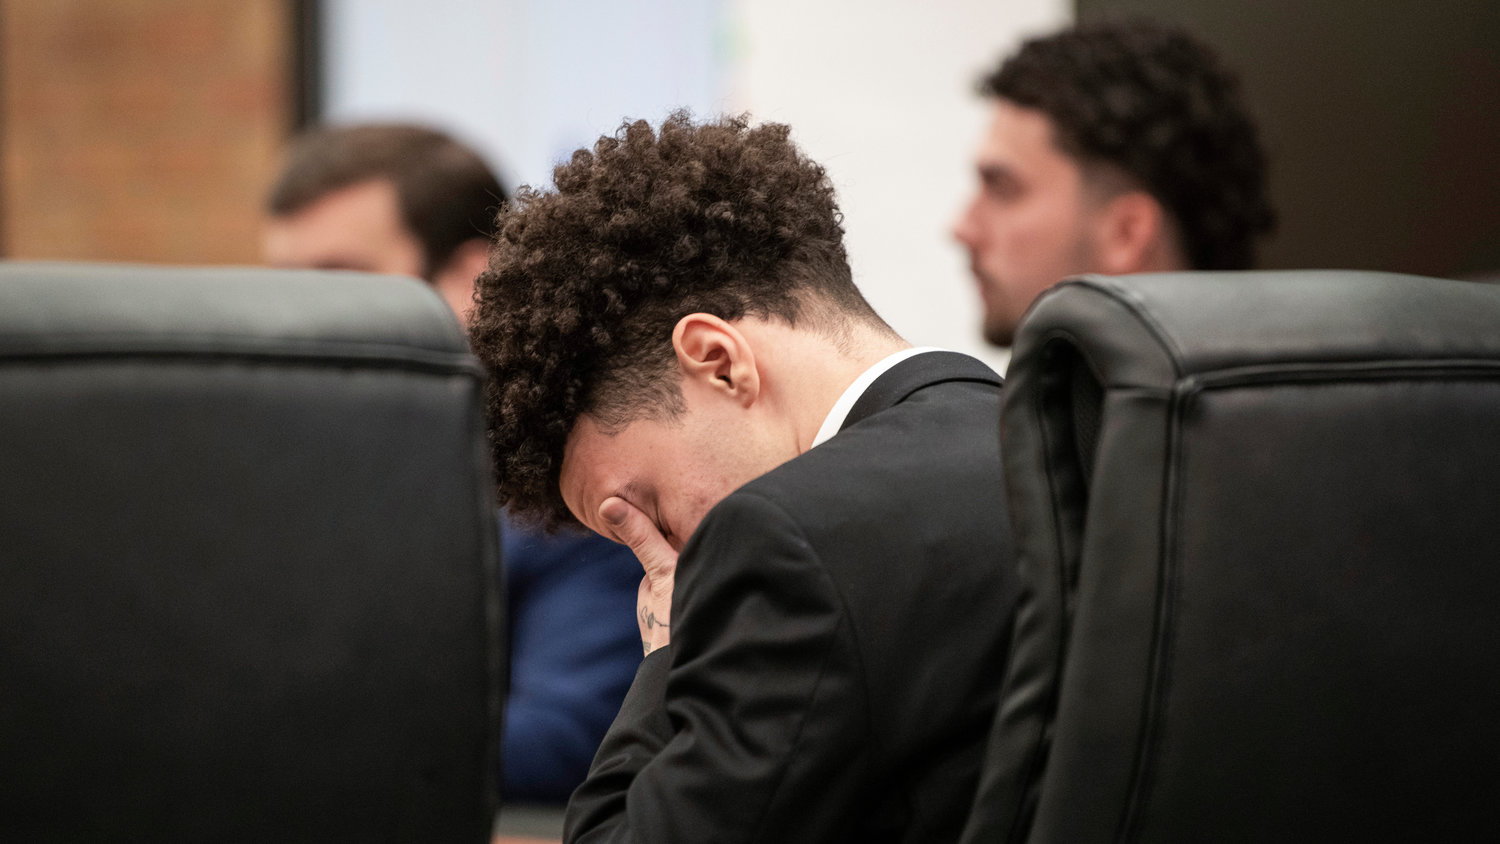 Lathan Echols, known professionally as “Lil Mosey,” reacts after a jury reached a not-guilty verdict in Chehalis on Thursday.